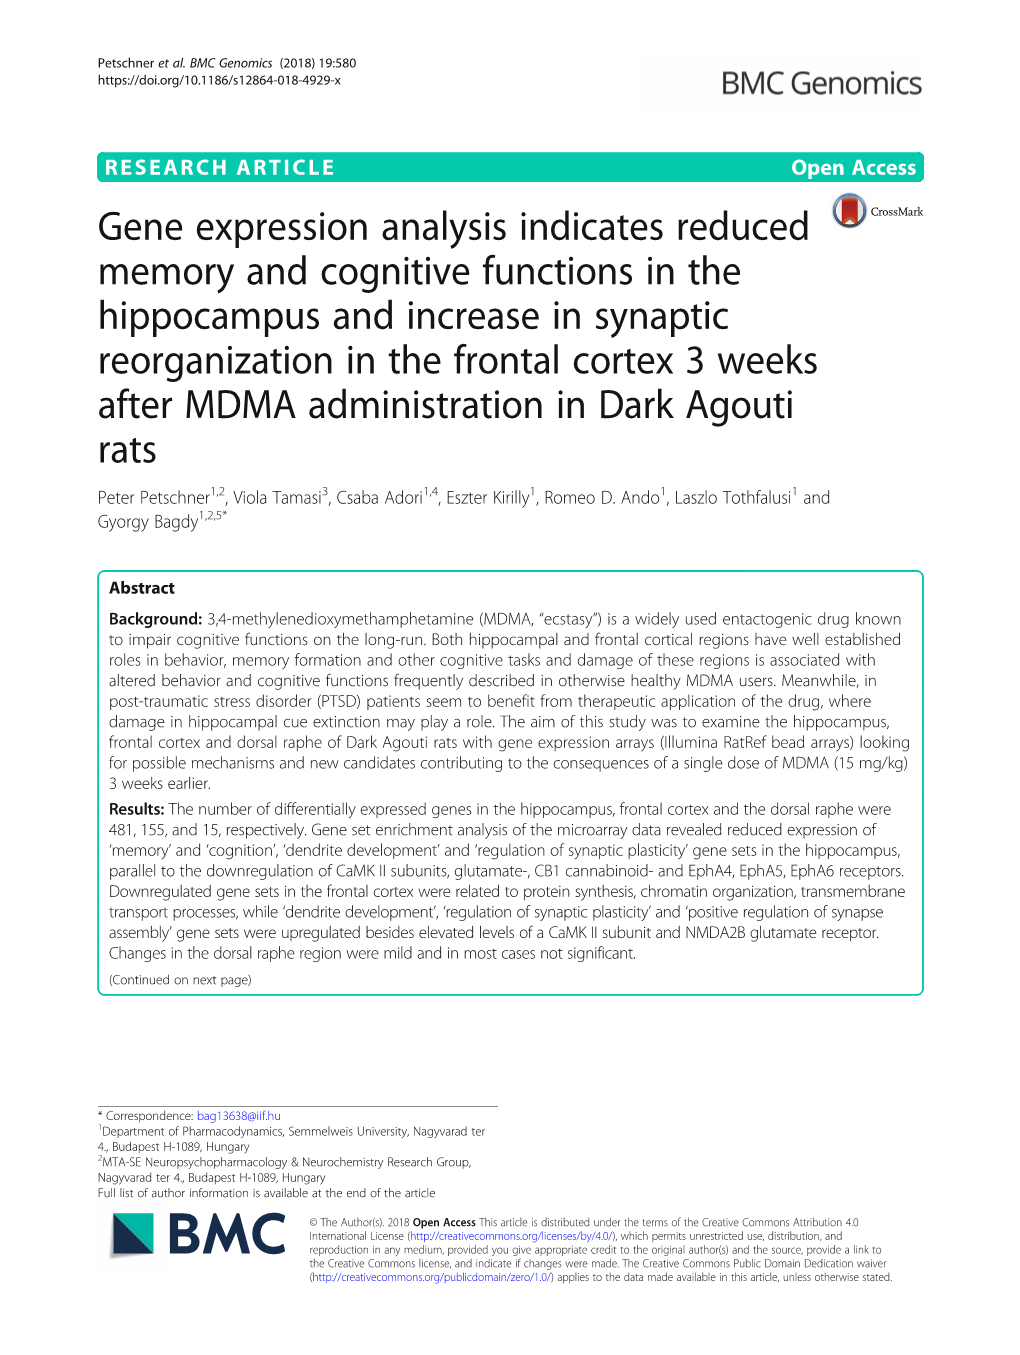 Gene Expression Analysis Indicates Reduced Memory and Cognitive